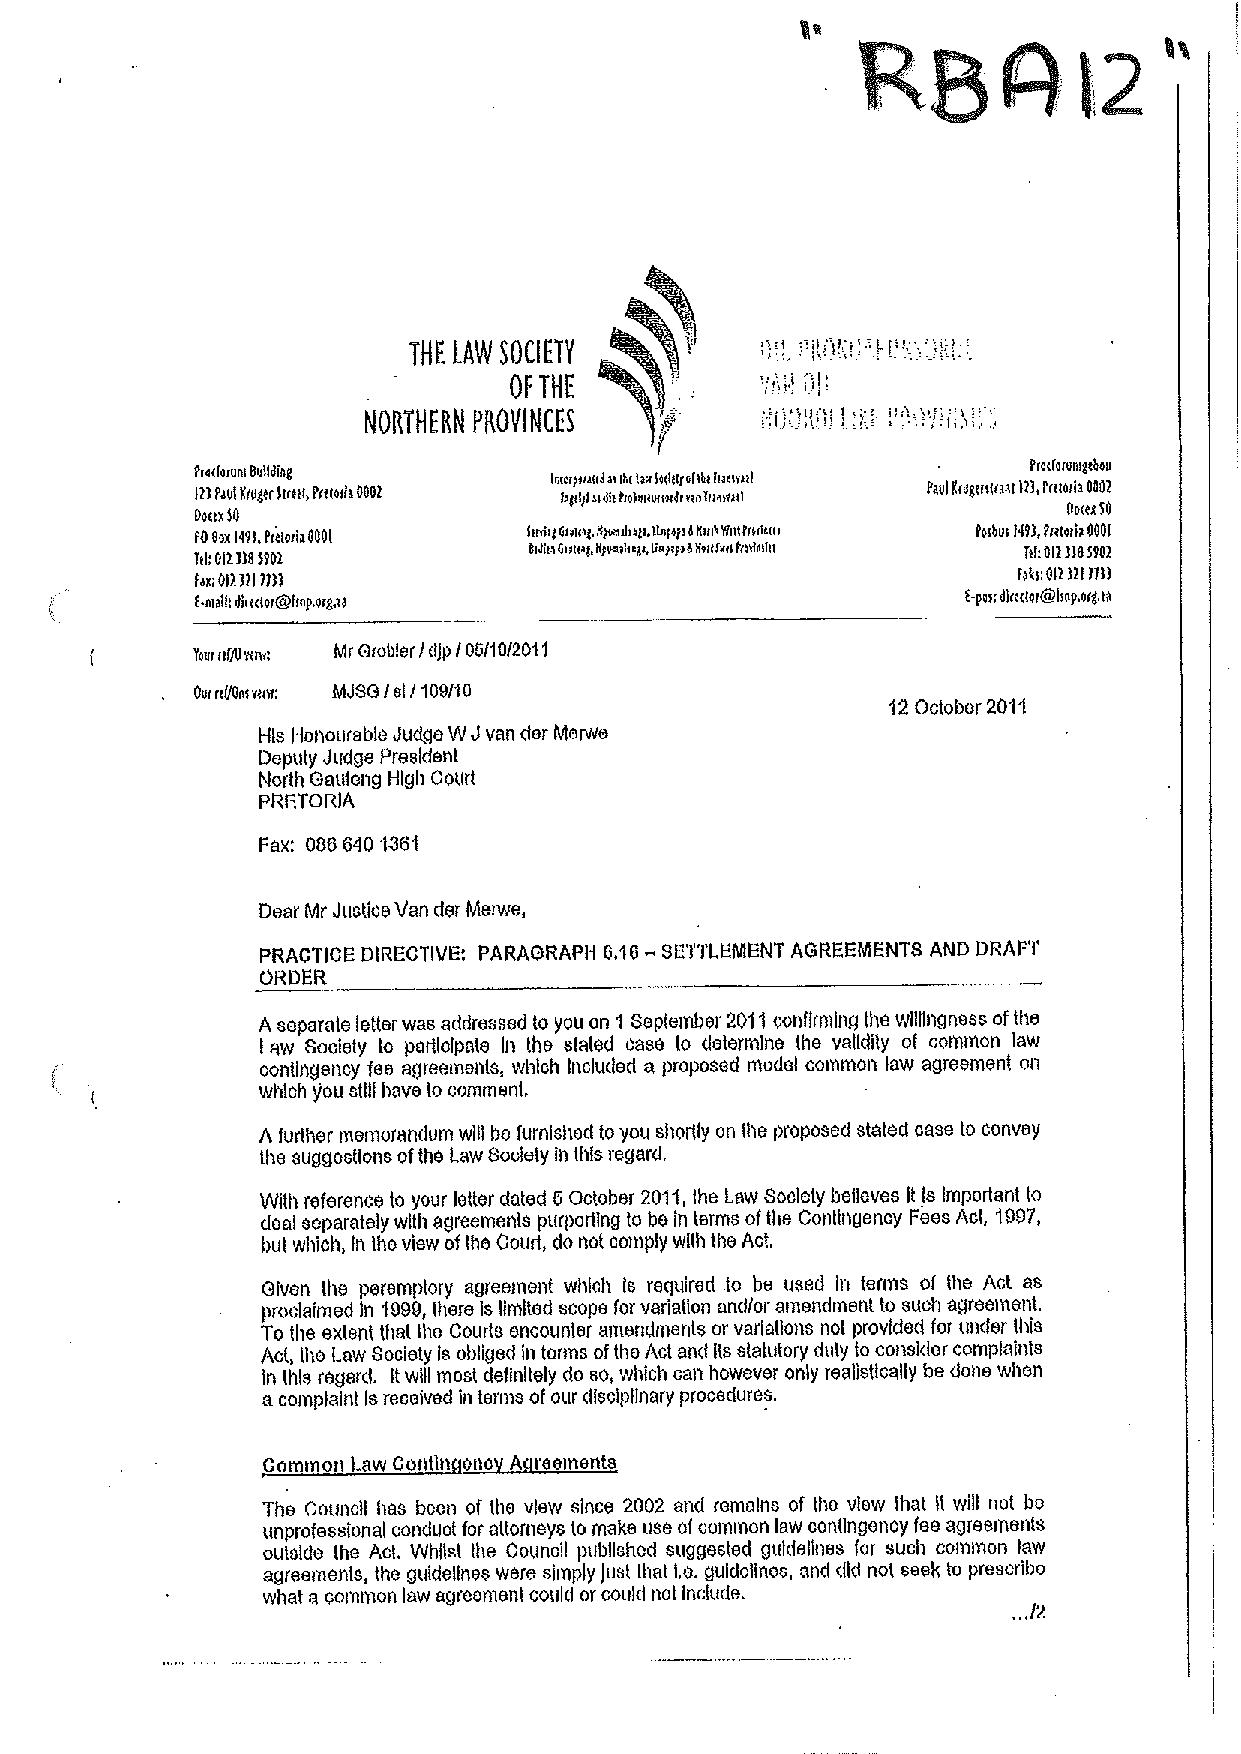 Annexure RBA12 Letter from Law Society to the the Deputy Judge President page 001